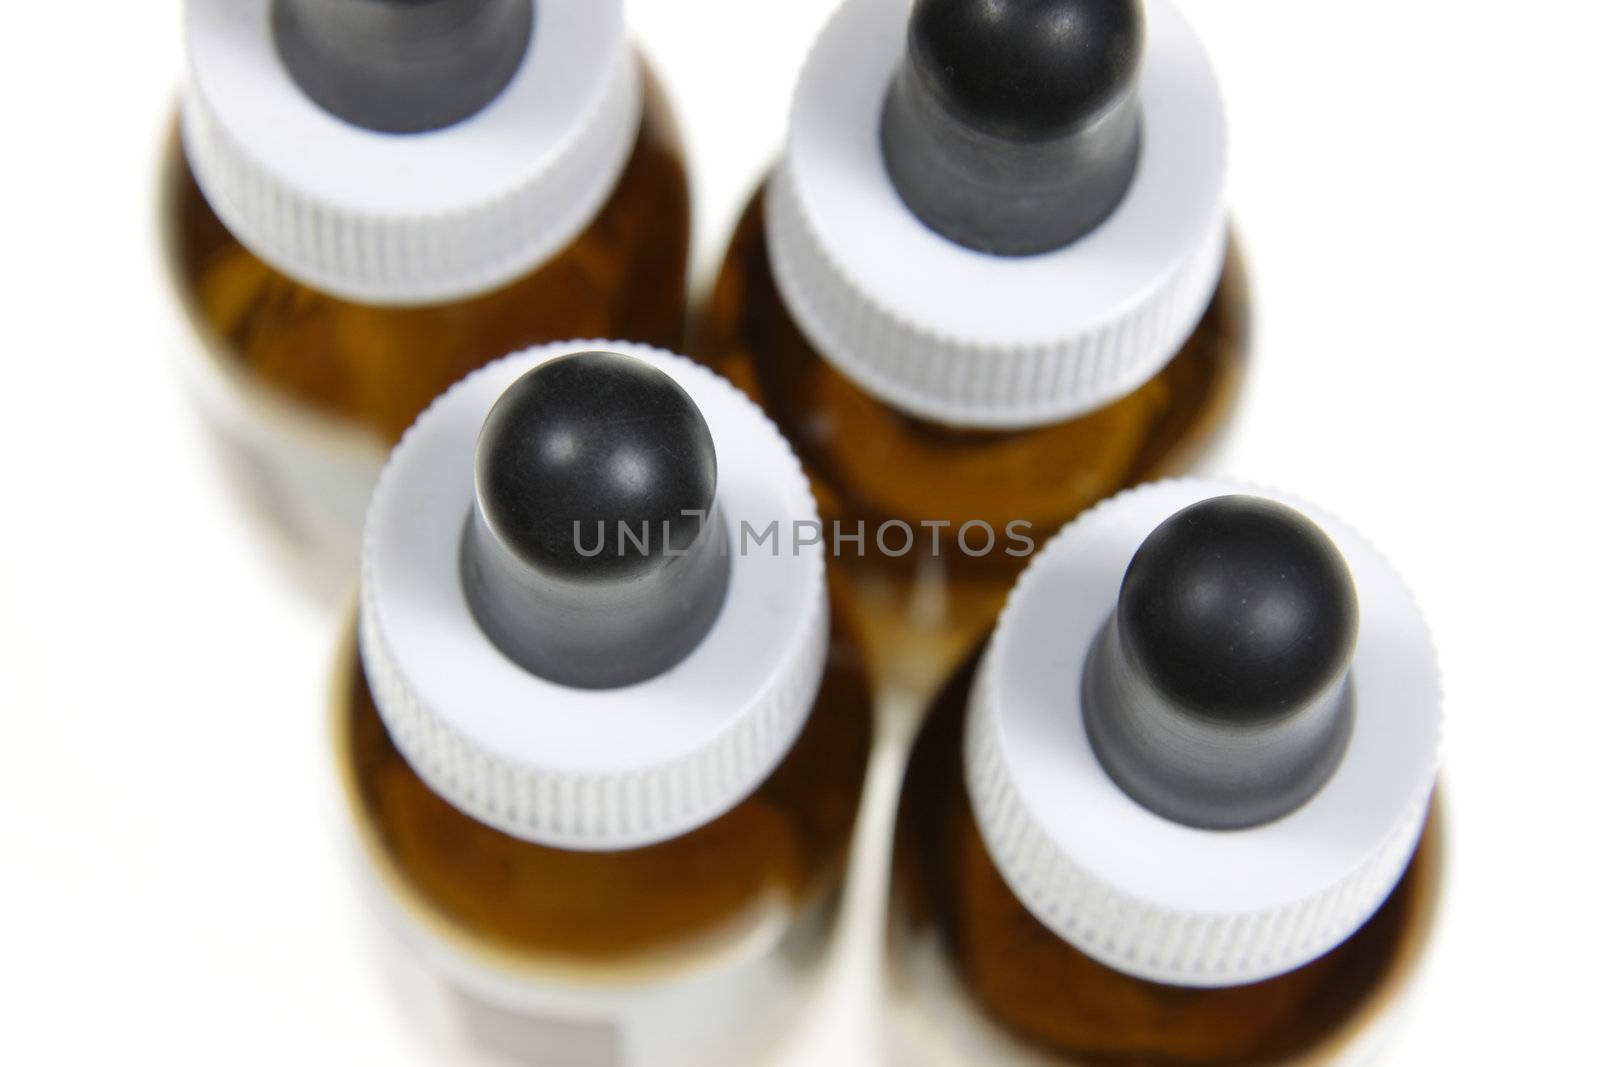 Homeopathic Dropper Bottles
 by ca2hill